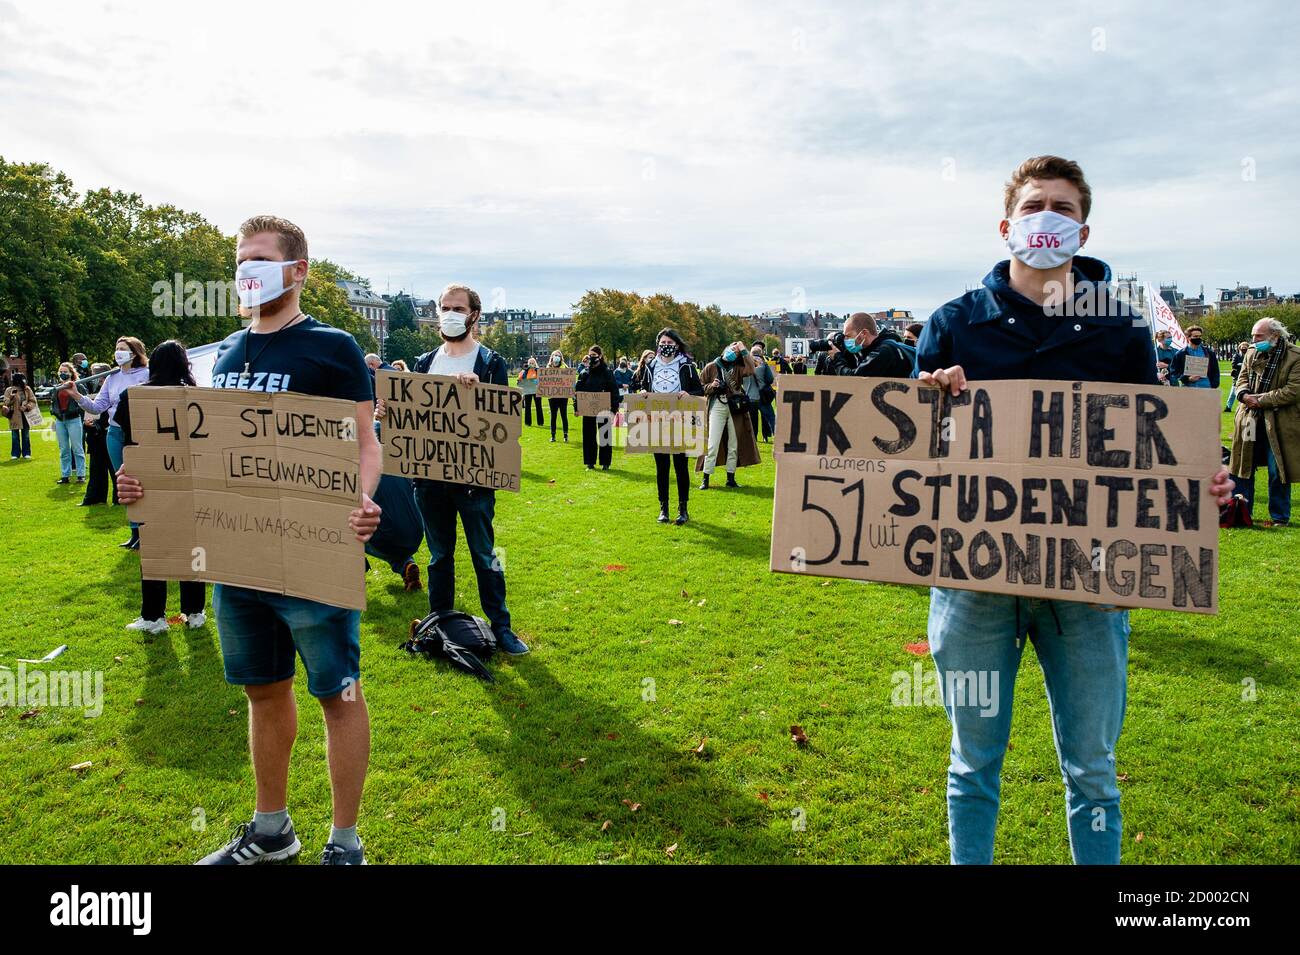 Students wearing face masks hold placards during the demonstration. Due to the measures against Covid-19, only 10 to 30 percent of education takes place in Schools. Some students don’t get to visit their campus at all, and teachers are struggling to digitalize their courses. Because of that, the Amsterdam student unions ASVA and SRVU, the National Student Union together with the #ikwilaansschool action group organized a protest to demand financial resources to provide safe physical education. Students and teachers gathered at the Museumplein holding placards in representation of students from Stock Photo